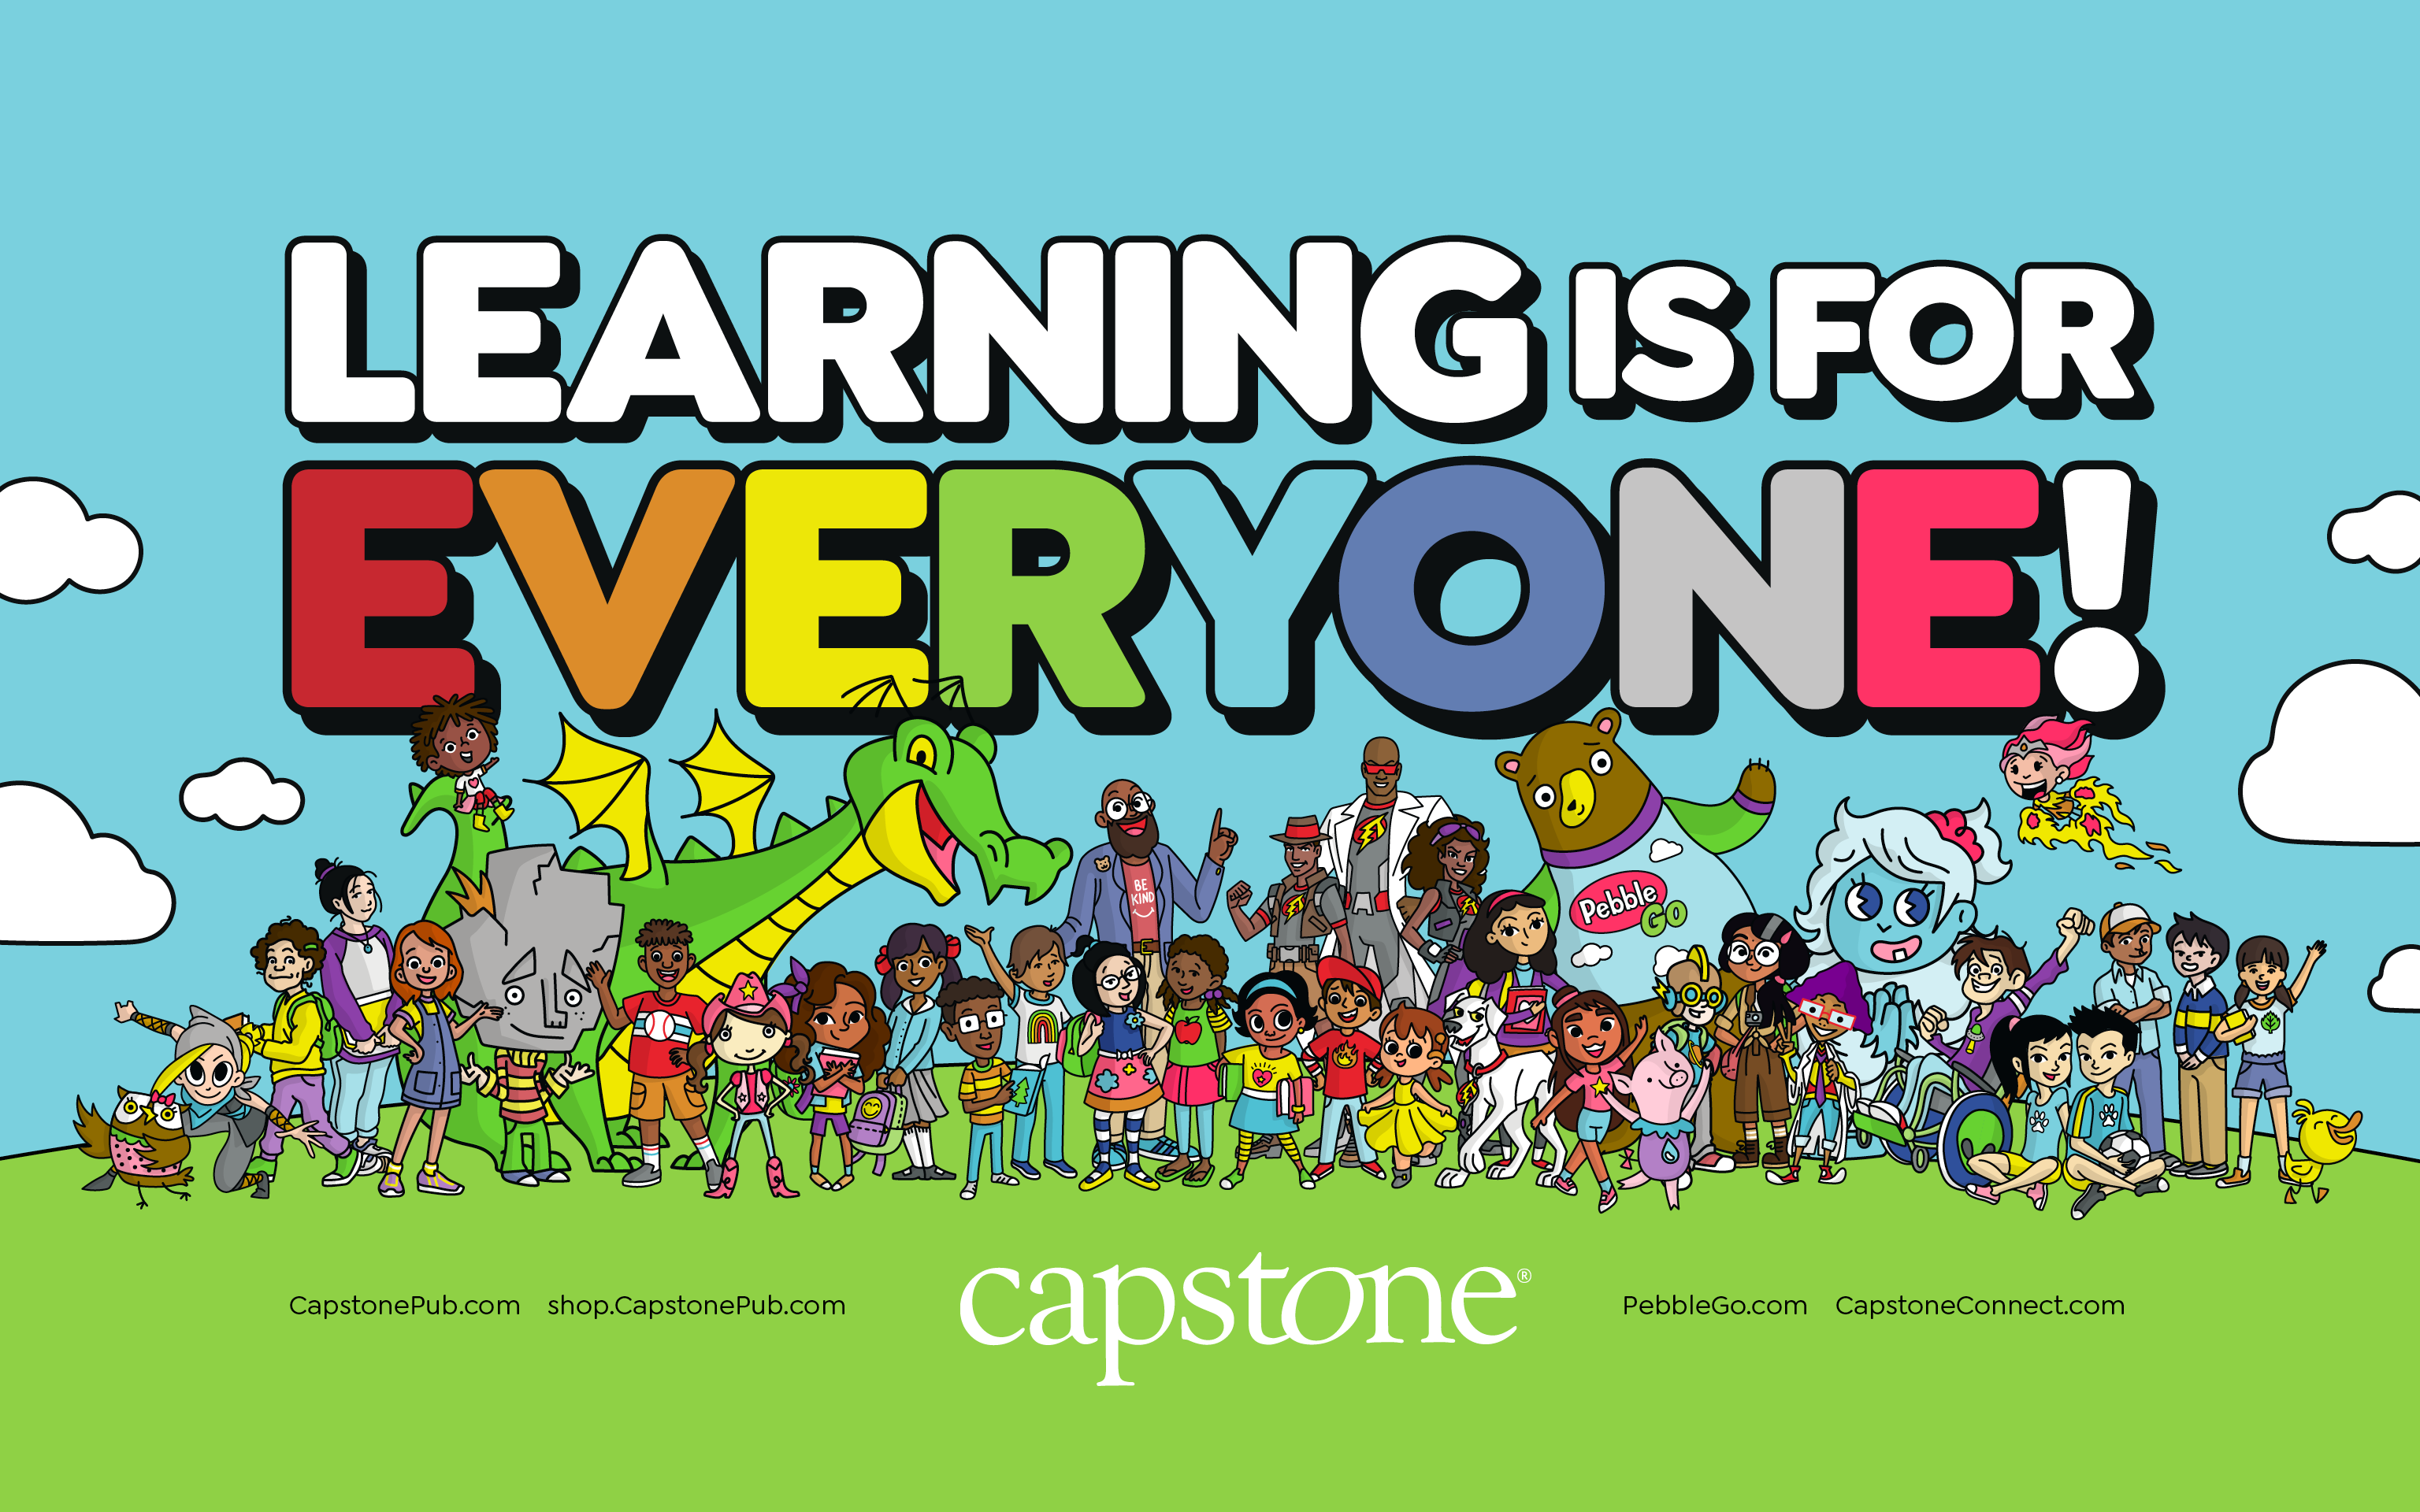 Wallpaper image featuring a cast of Capstone characters with the tagline "Learning Is for Everyone"